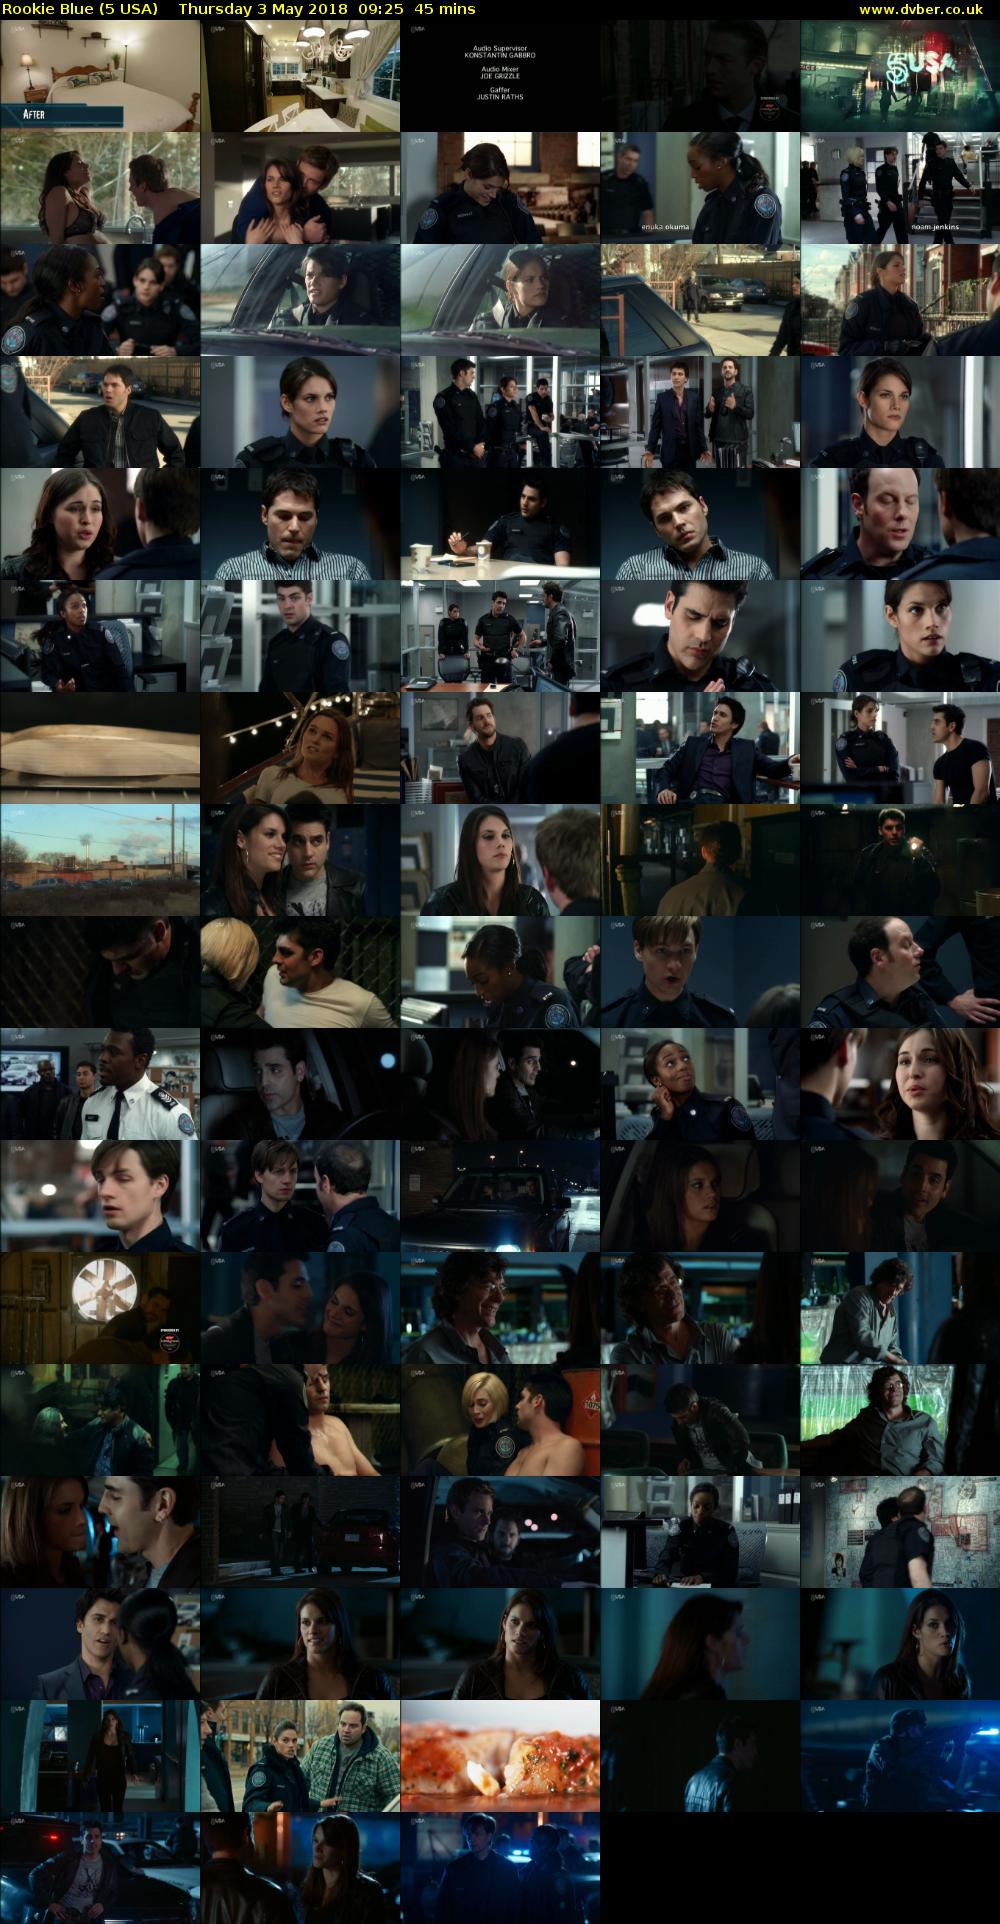 Rookie Blue (5 USA) Thursday 3 May 2018 09:25 - 10:10